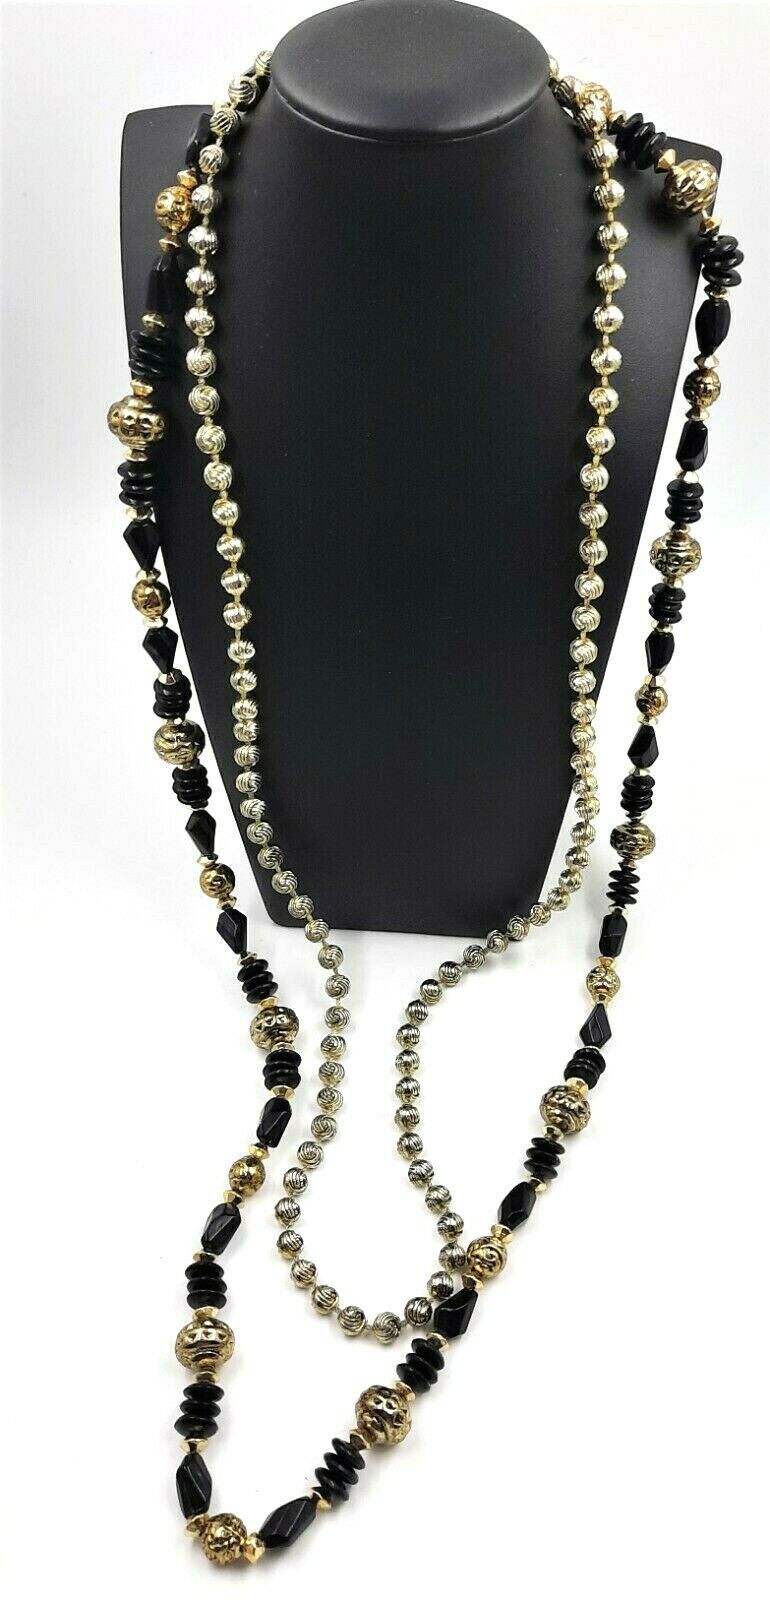 2 Black & Gold Beaded Vintage Necklaces Women's Fashion Costume Jewellery Unbranded Does Not Apply - фотография #6